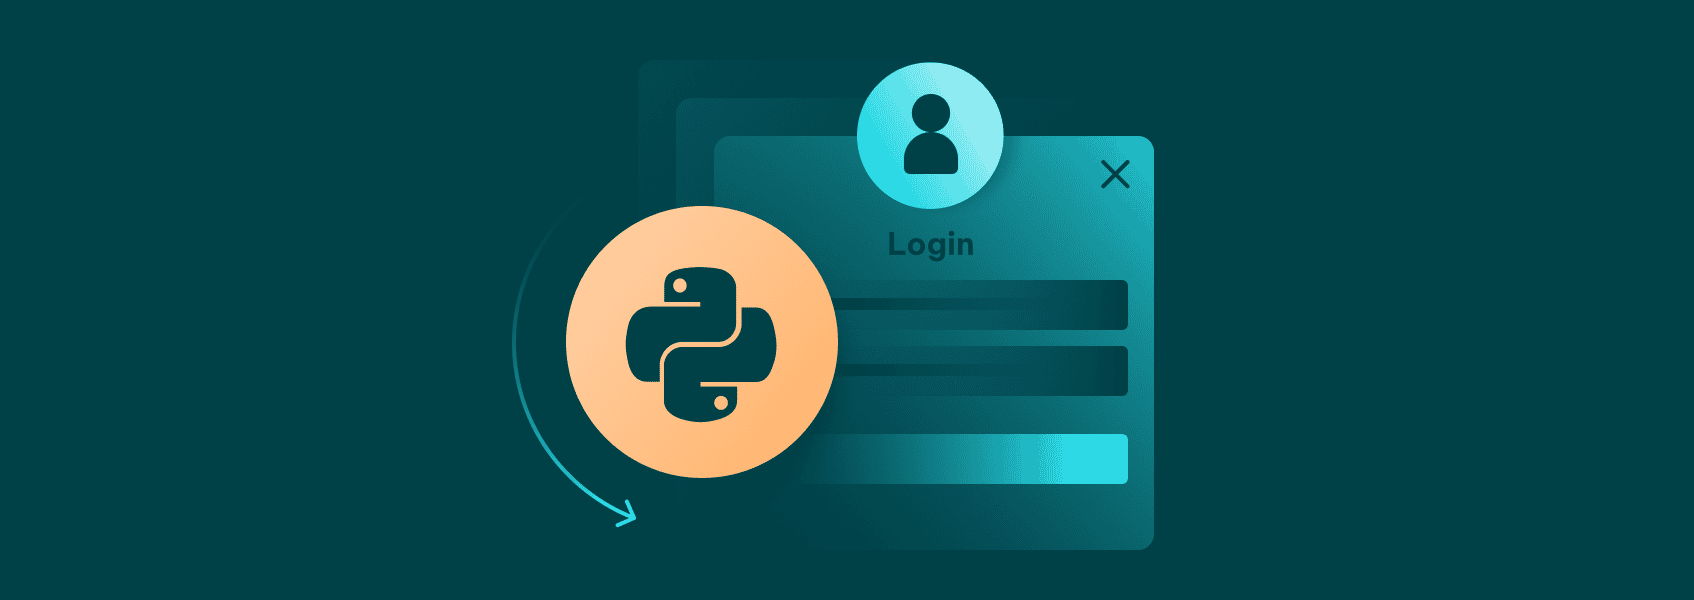 How to Scrape a Website That Requires a Login: Python Tutorial